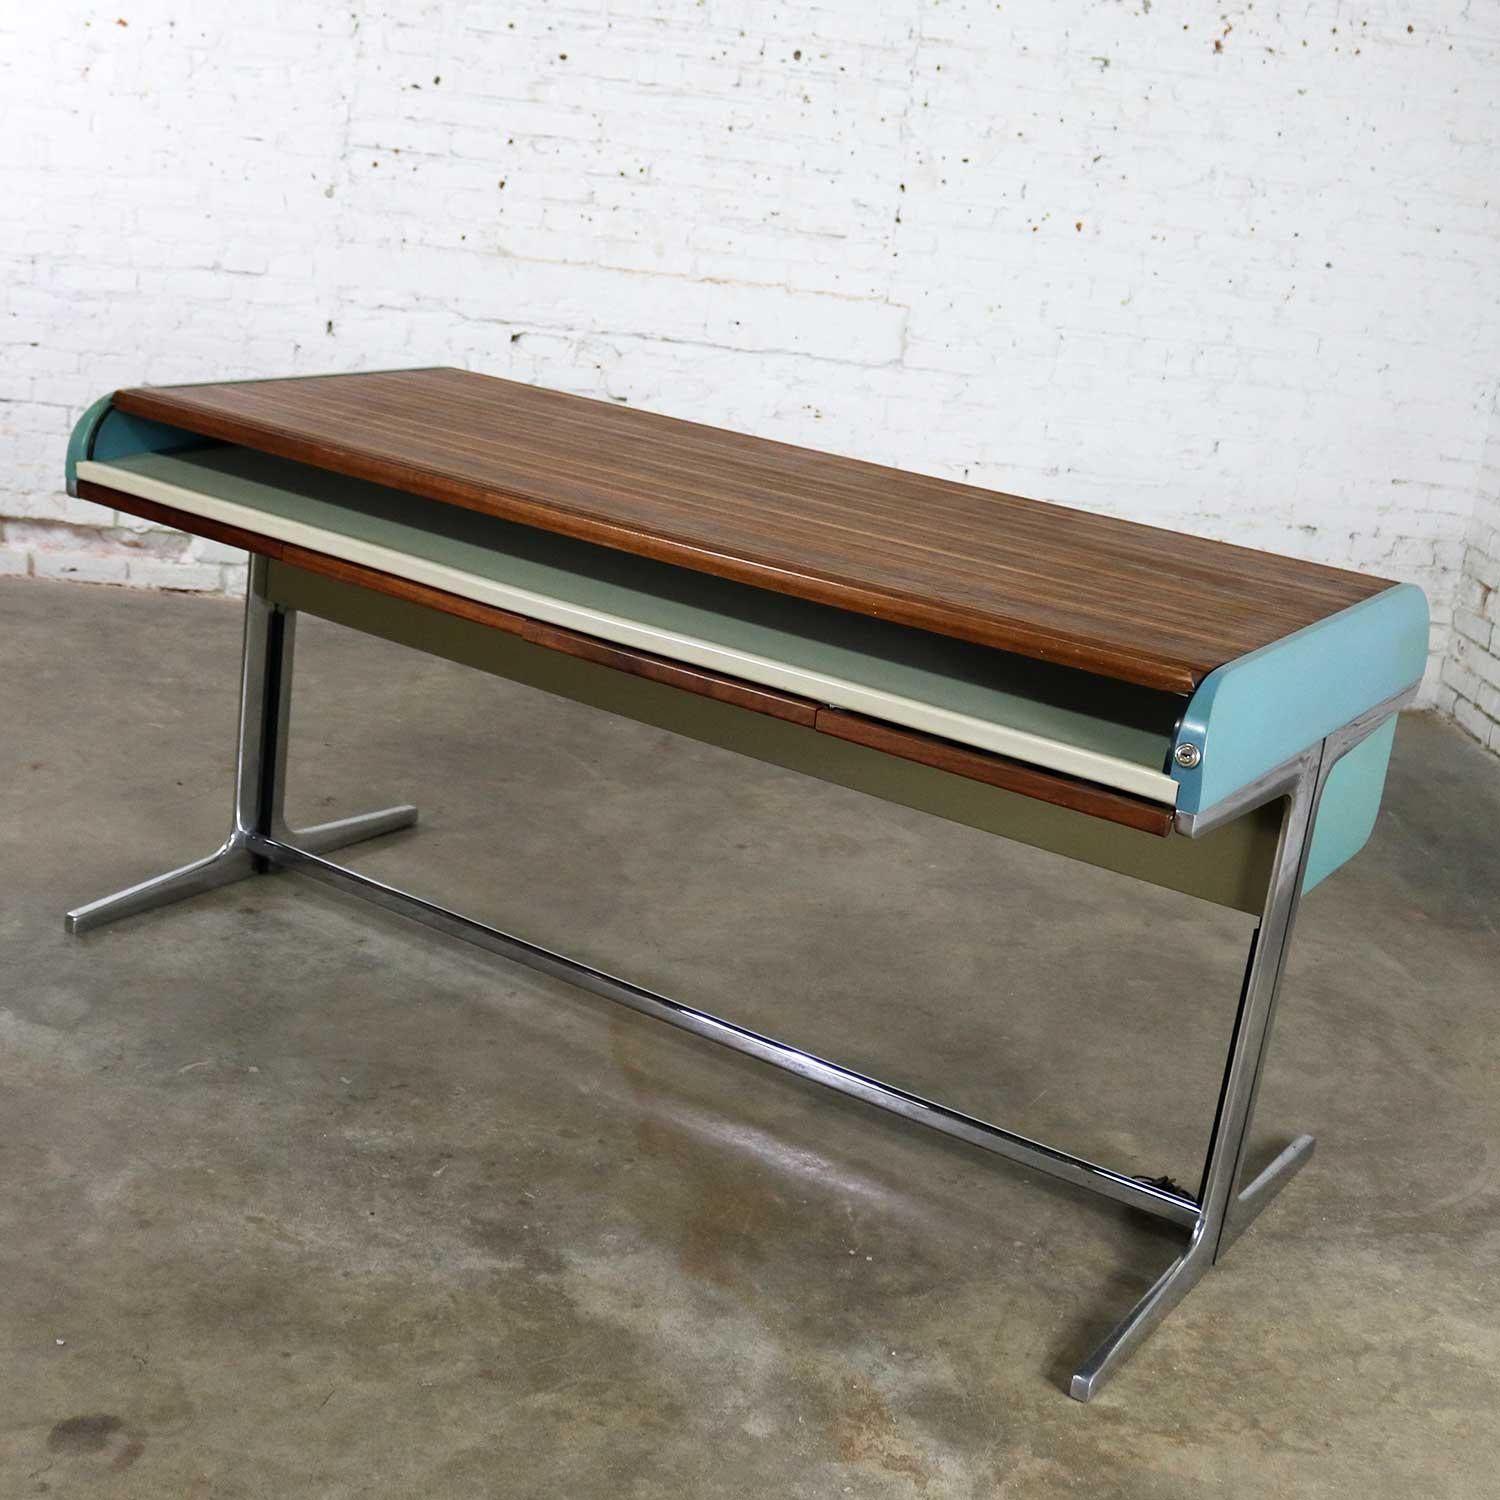 Lacquered MCM Herman Miller Action Office I Roll Top Desk by George Nelson & Robert Propst